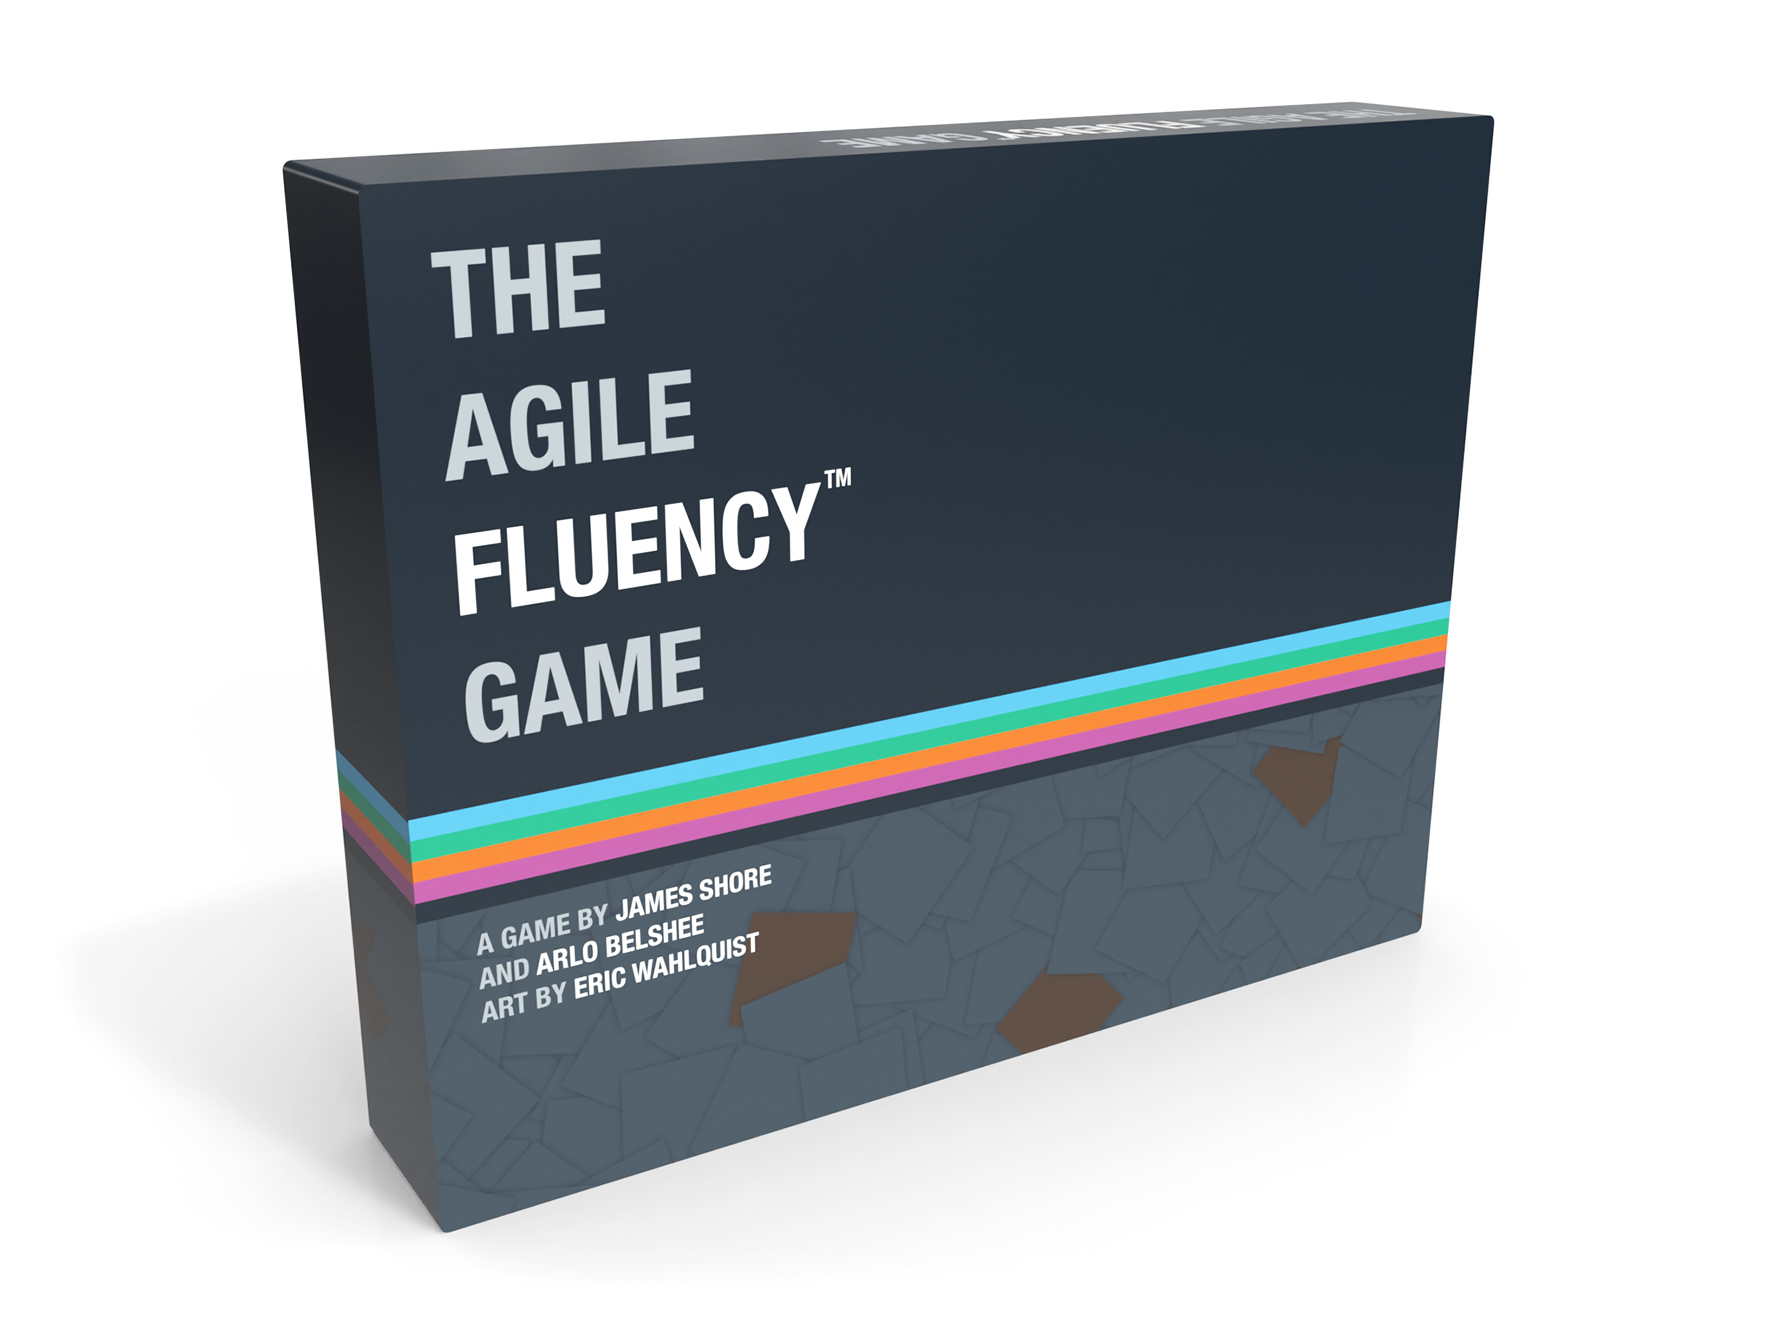 A picture of the Agile Fluency Game box.